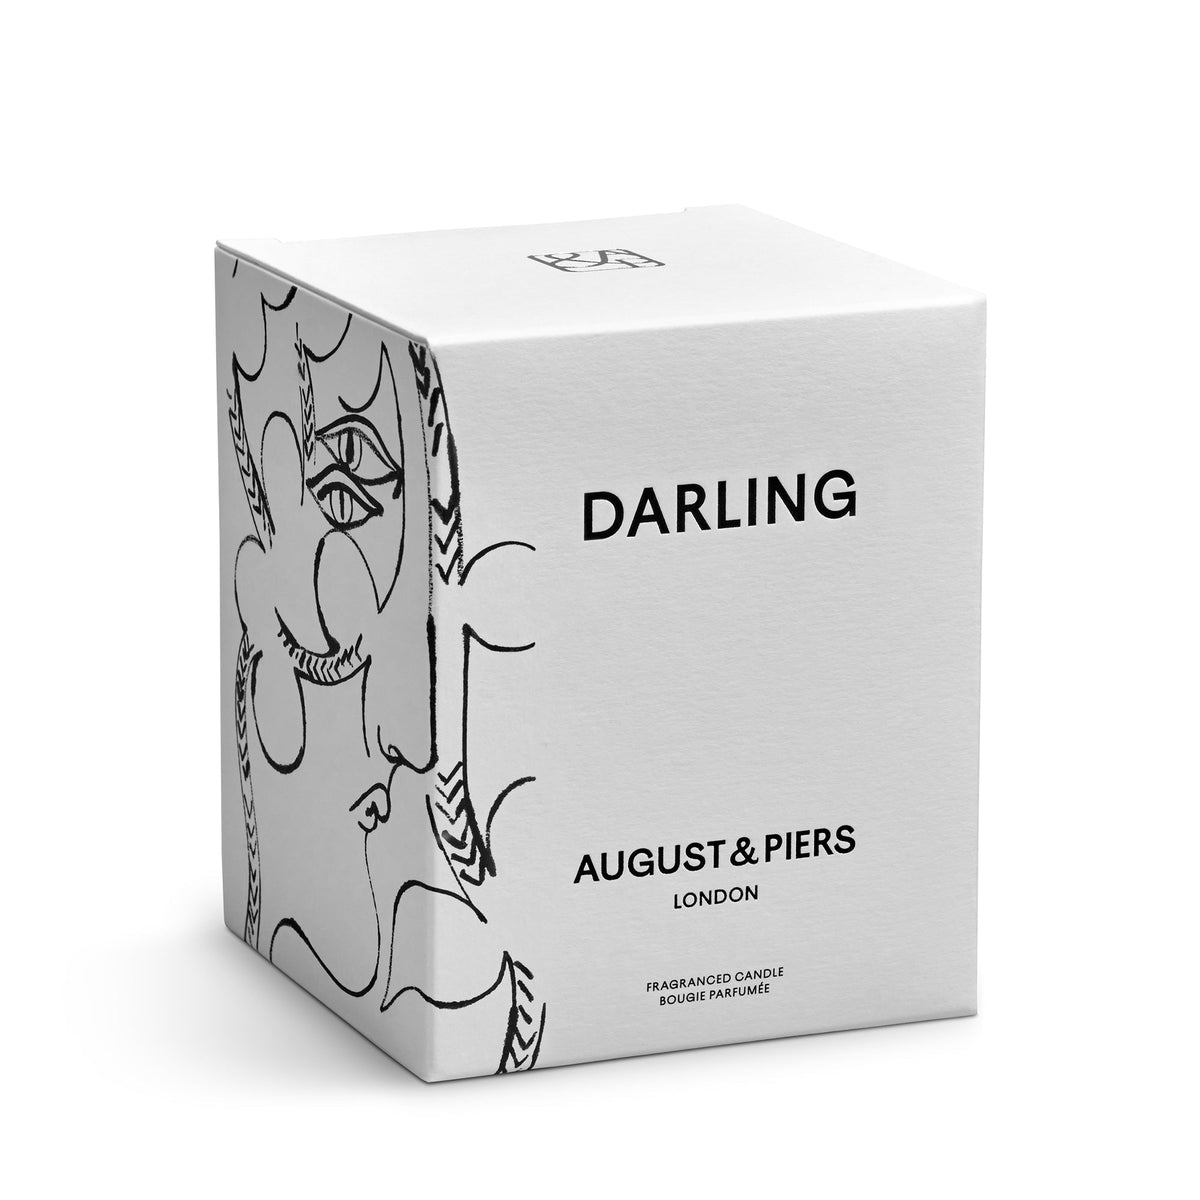 August & Piers Darling Scented Candle